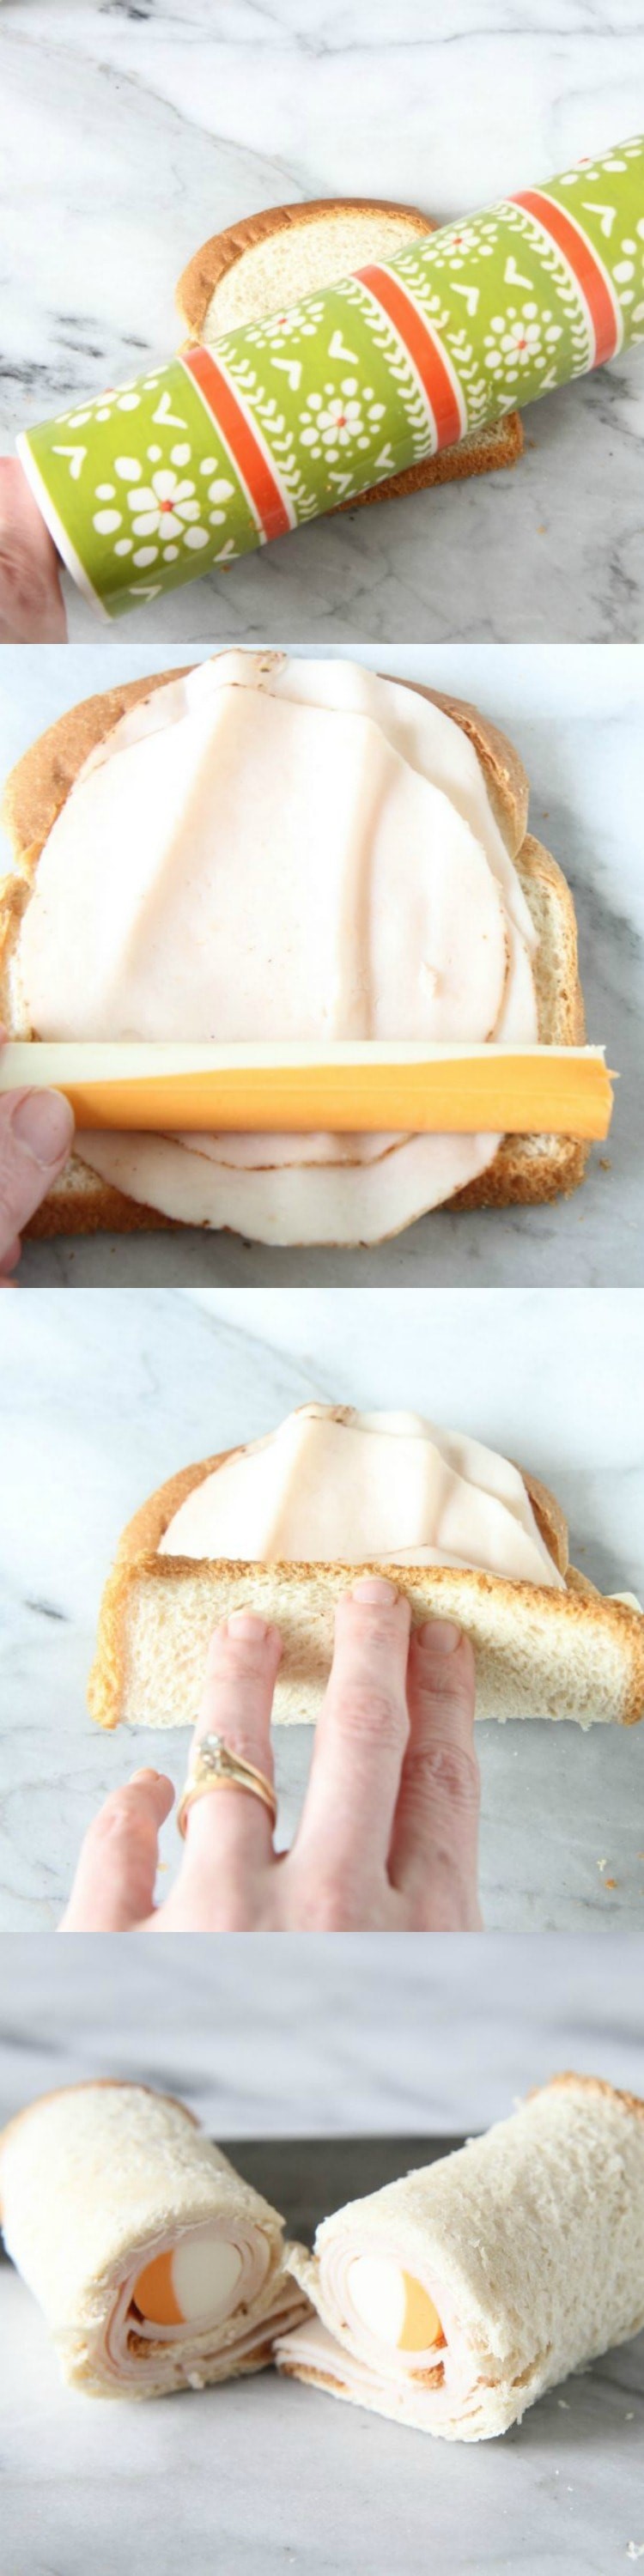 Sushi sandwich lunch hacks from MomAdvice.com